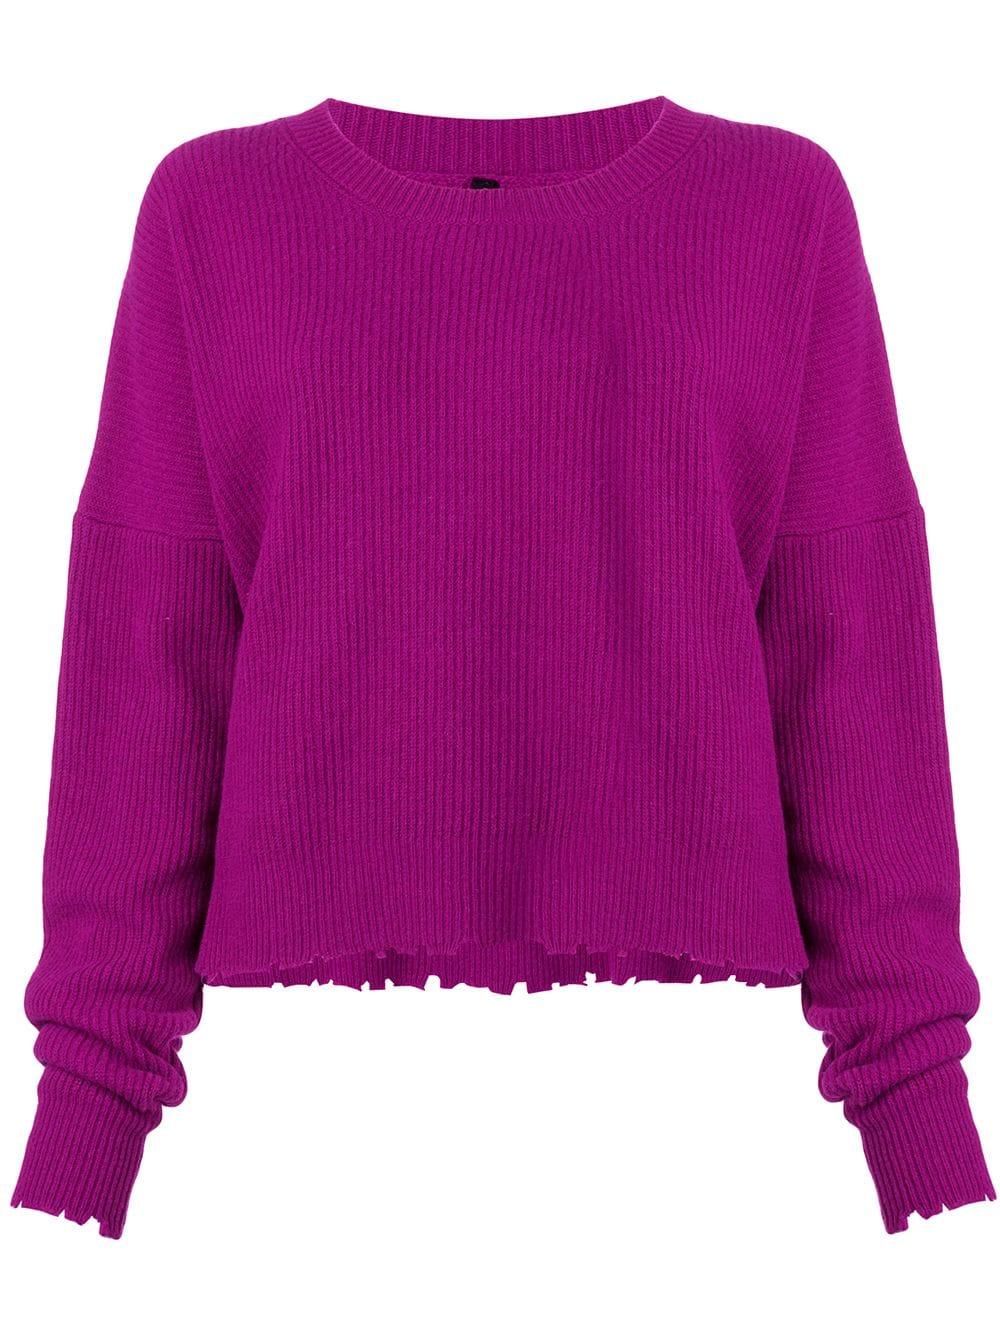 Unravel Project Wool Frayed Knit Sweater in Pink - Lyst